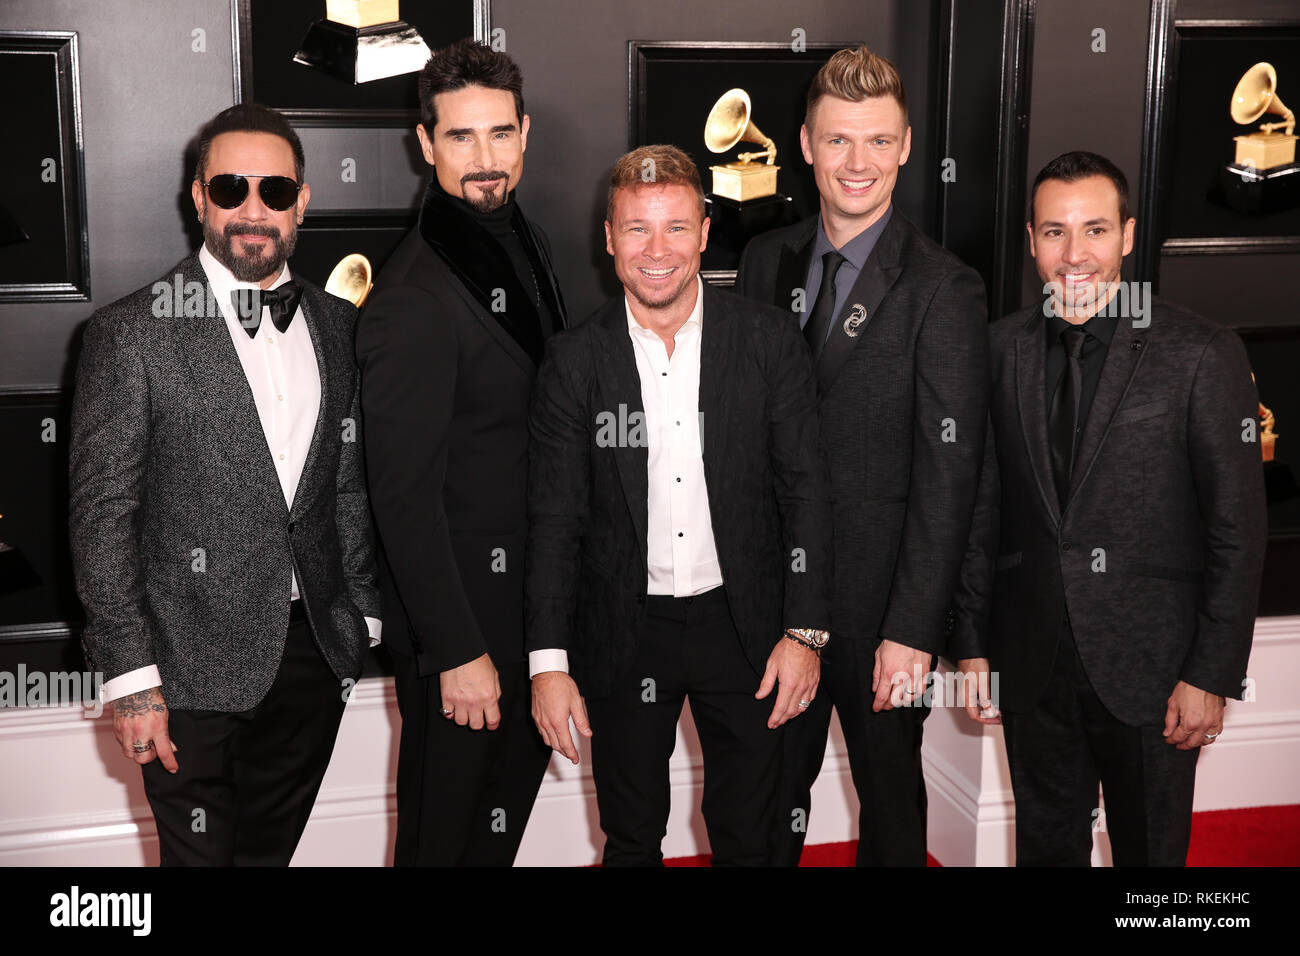 Los Angeles, California, USA. 14th Jan, 2019. February 10, 2019 - Los Angeles, California, U.S. - (L-R) AJ McLean, Kevin Richardson, Brian Littrell, Nick Carter, and Howie Dorough pose upon arrival for The 61st Annual Grammy Awards. Credit: Alexander Seyum/ZUMA Wire/Alamy Live News Stock Photo